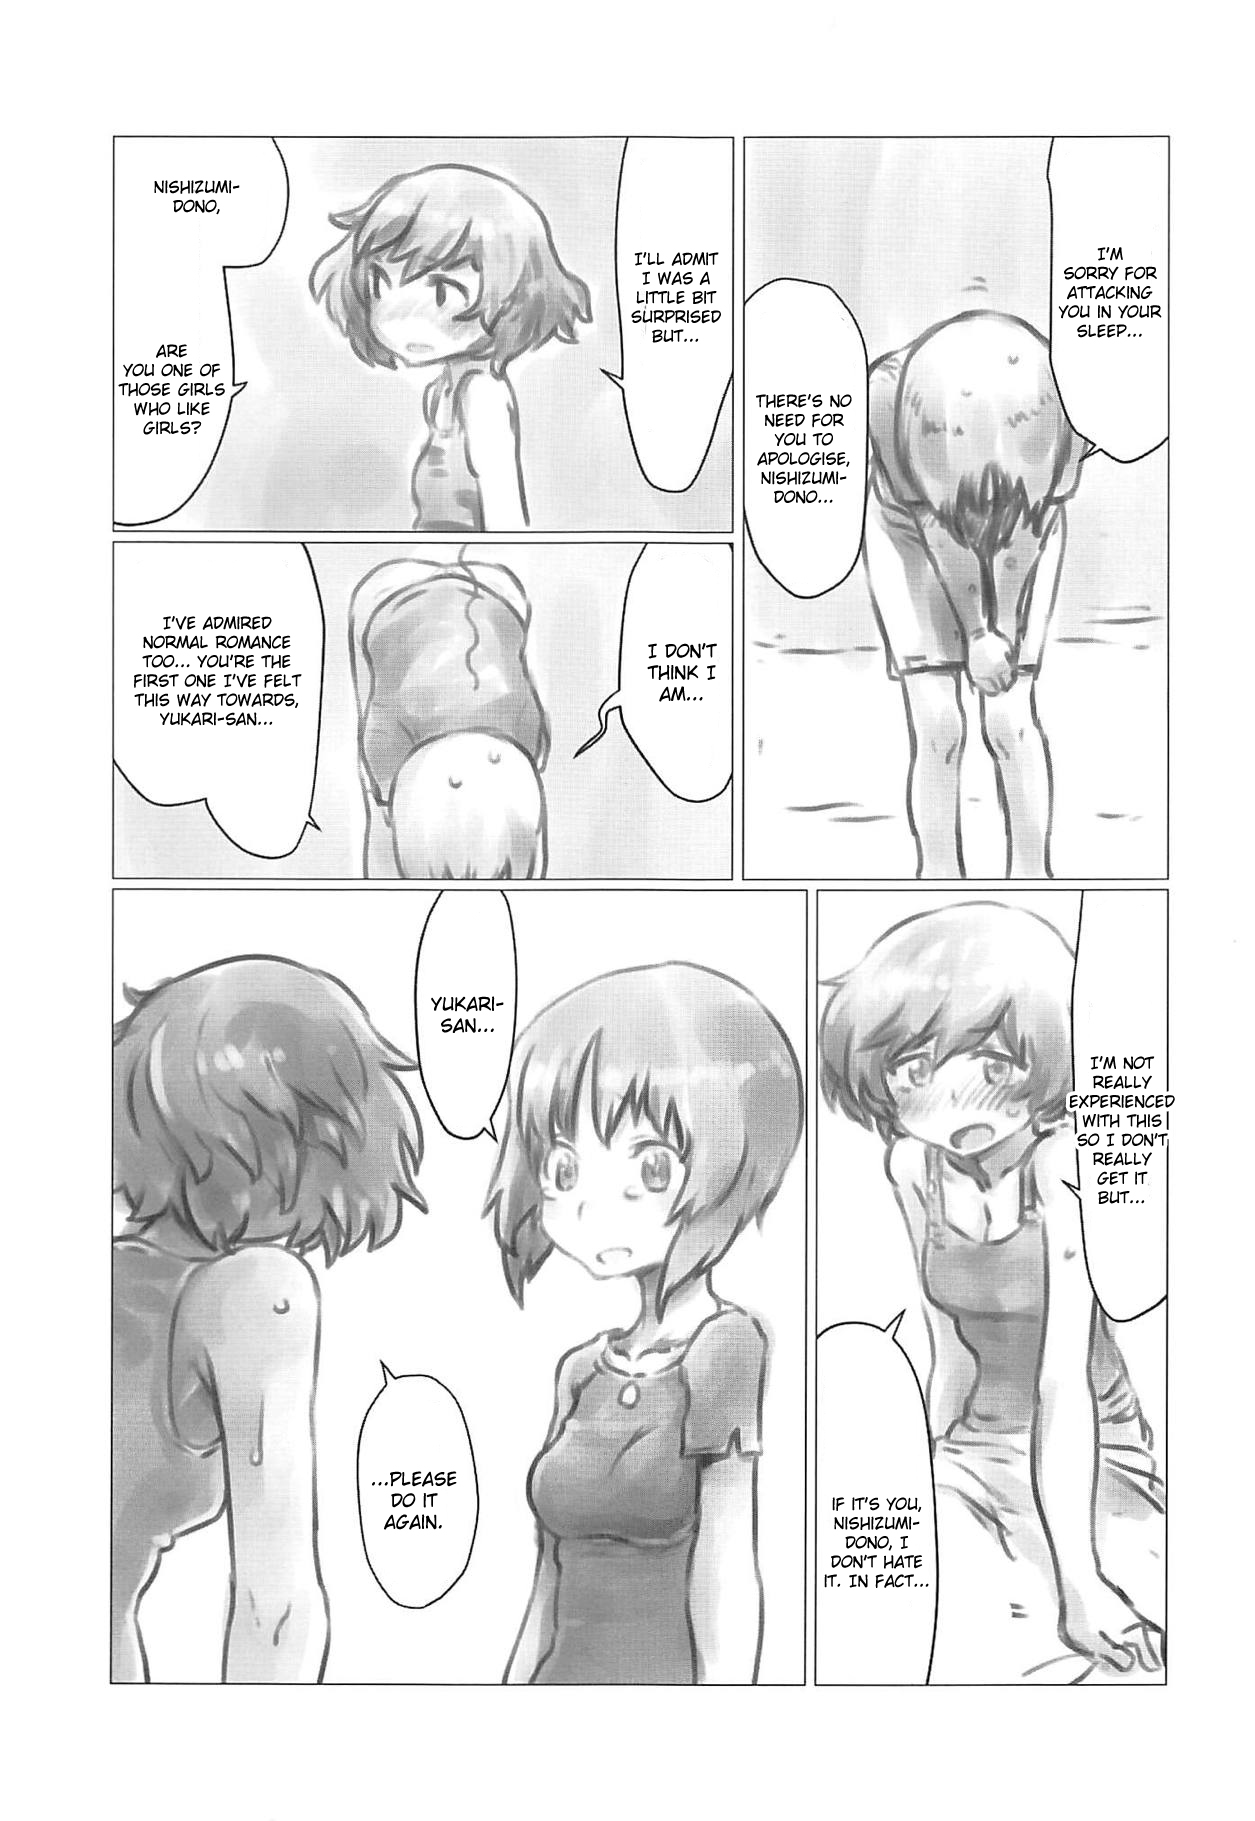 (Panzer Vor! 20) [Xikyougumi (Sukeya Kurov)] THE DOG MAY STAND THE STRONG INSTEAD (Girls und Panzer) [English] page 8 full